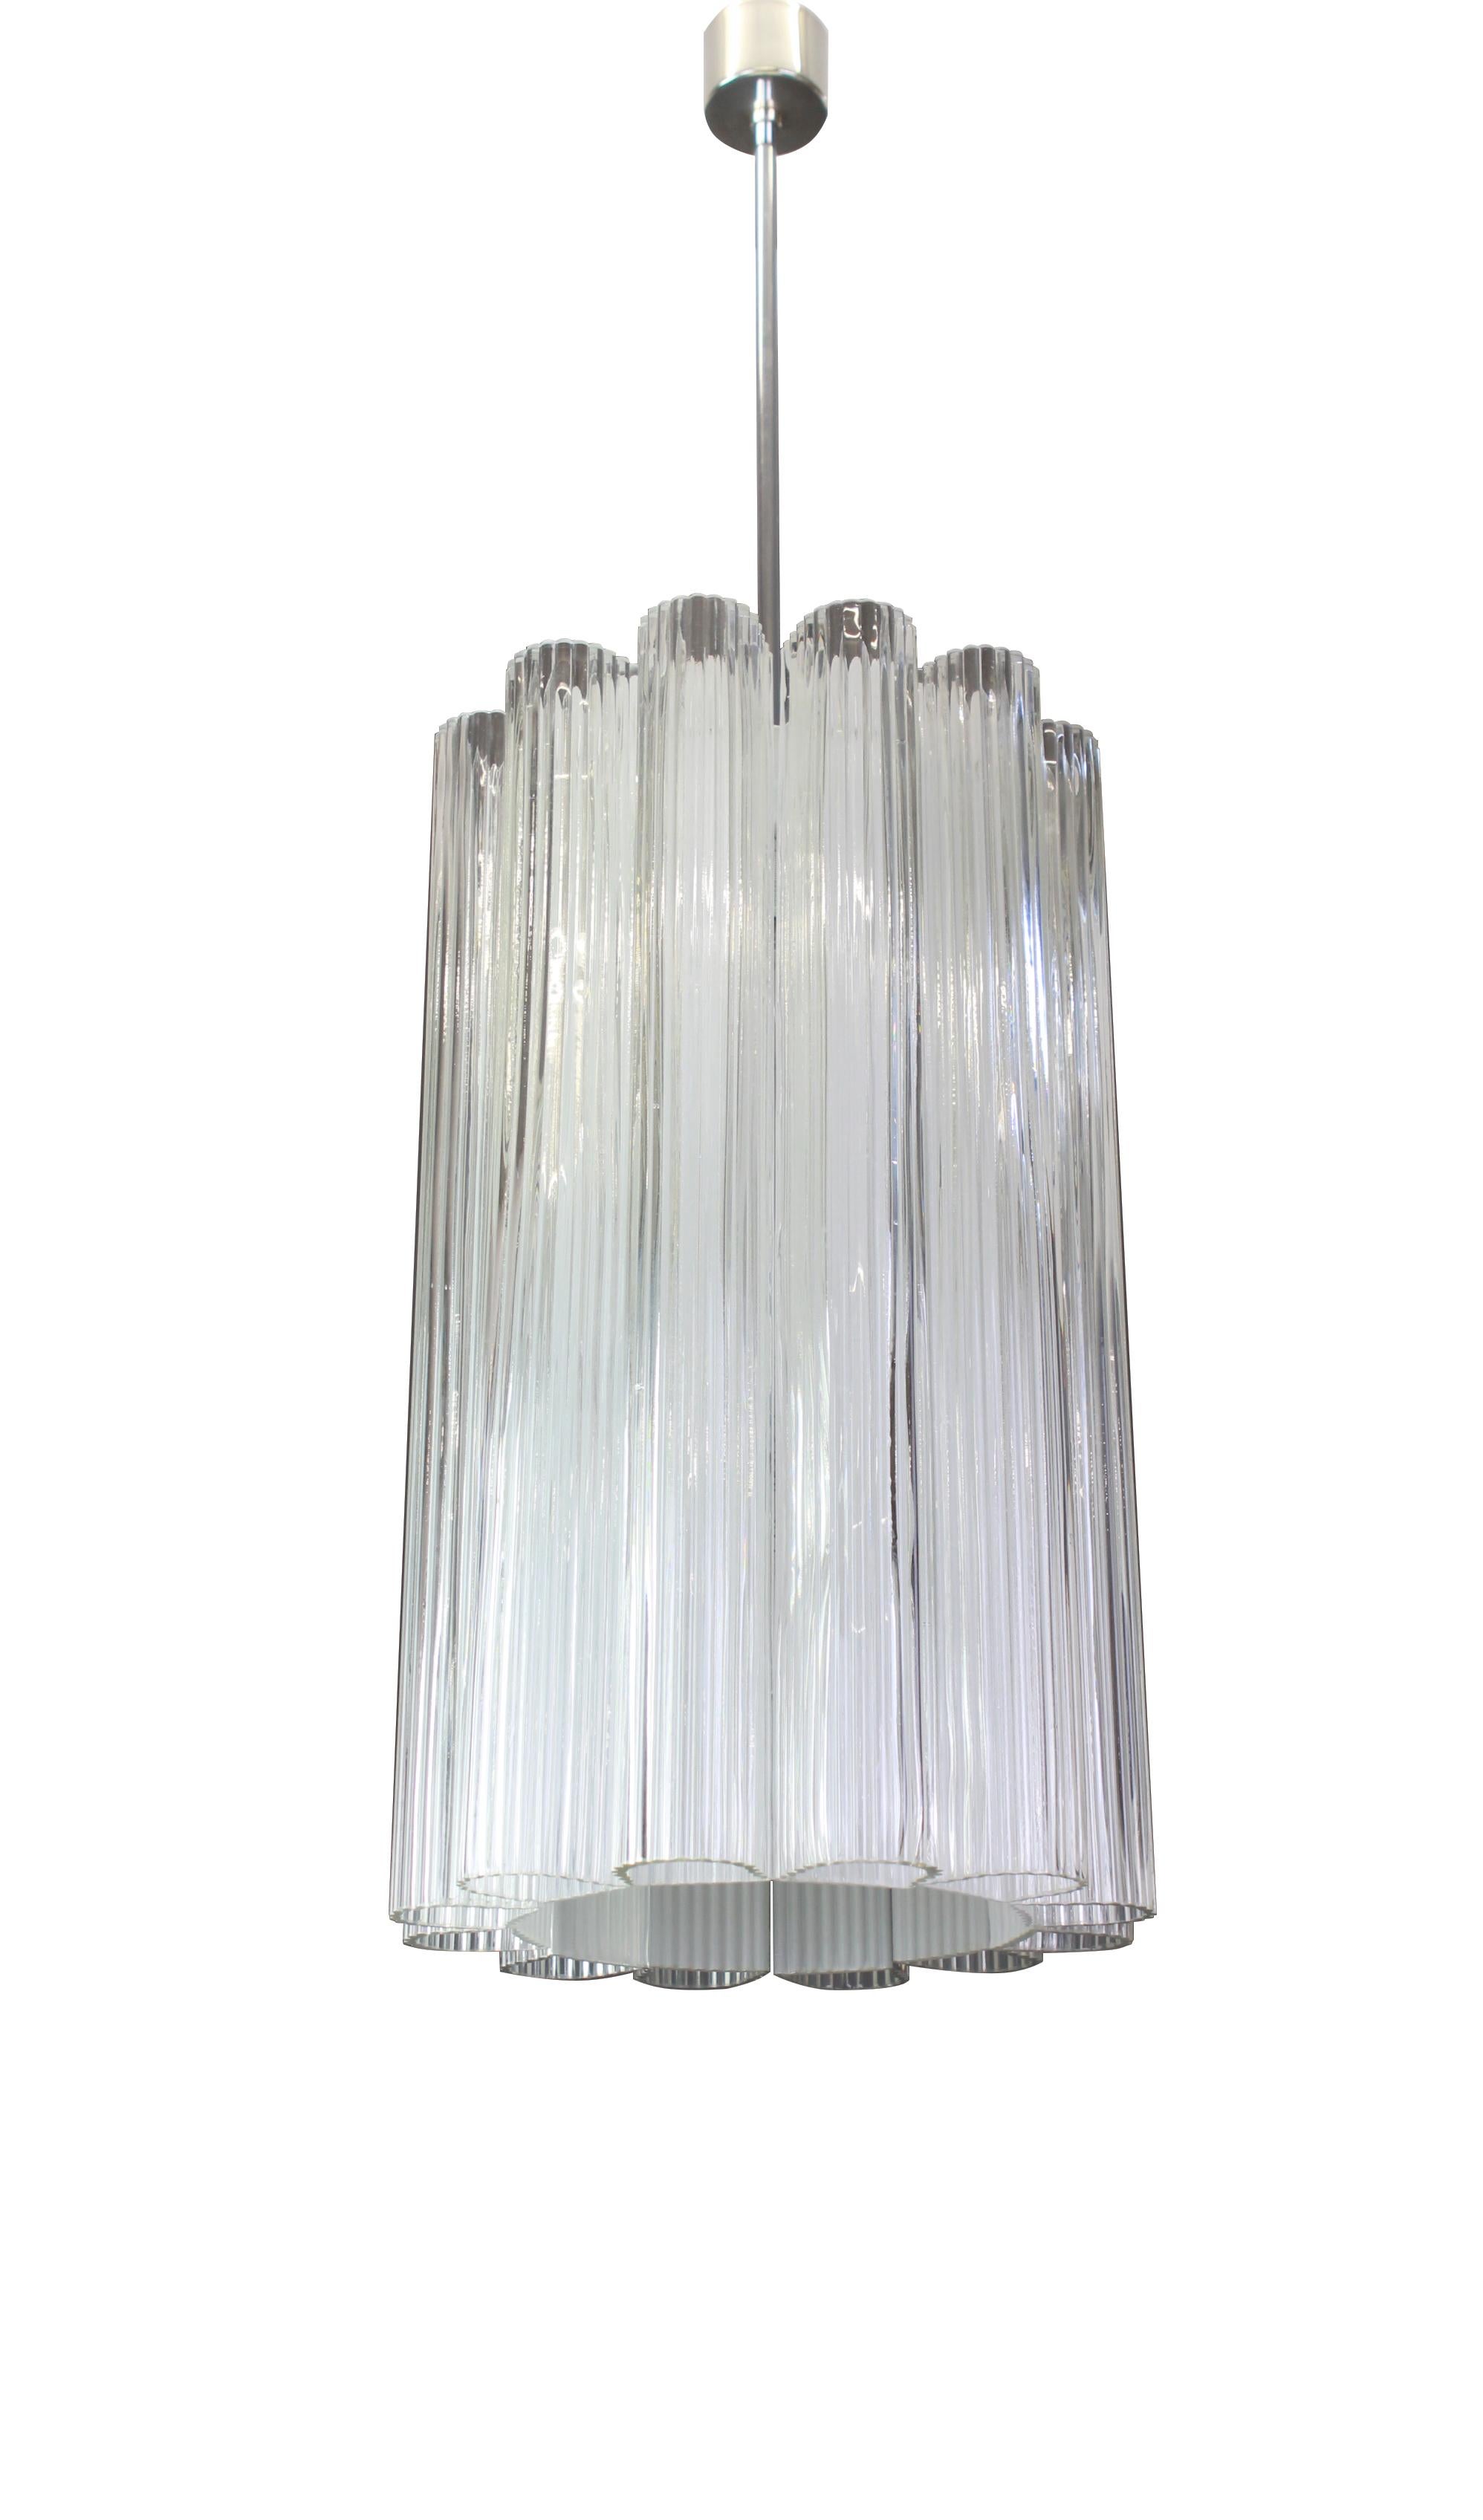 Mid-Century Modern 1 of 2 Cylindrical Pendant Fixture with Crystal Glass by Doria, Germany, 1960s For Sale